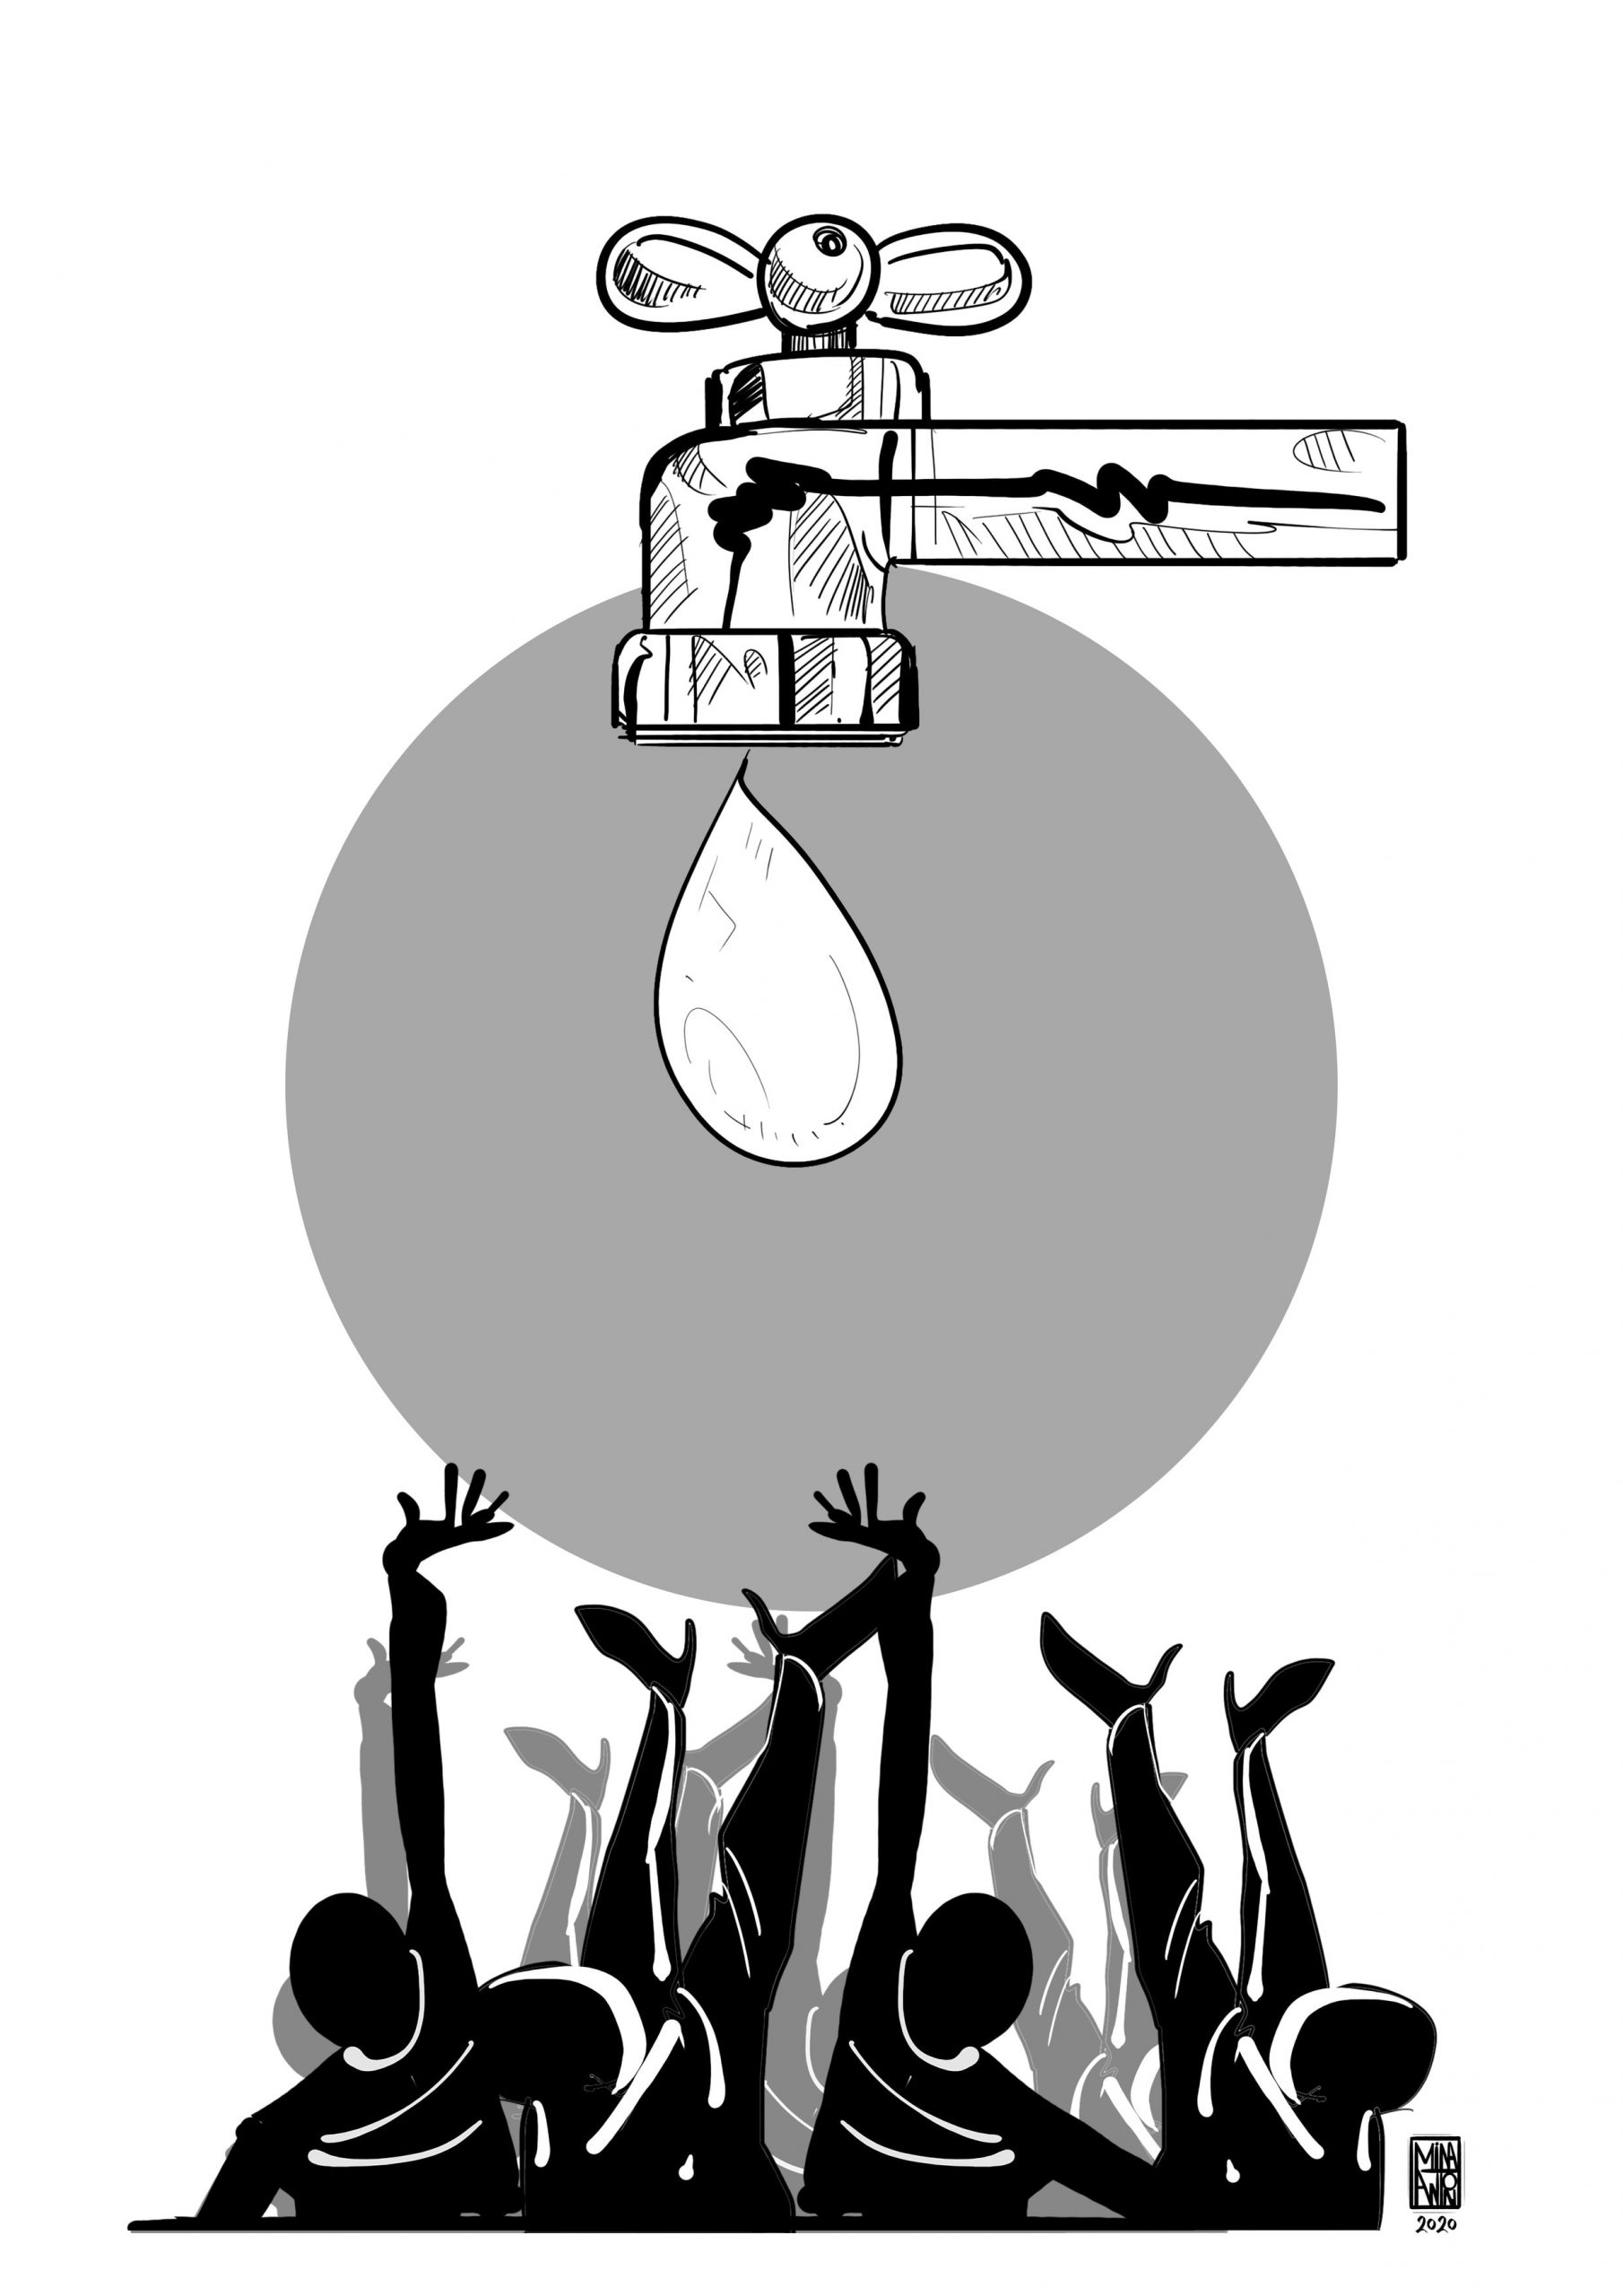 Striving for Water and Food Security - The Cairo Review of Global Affairs